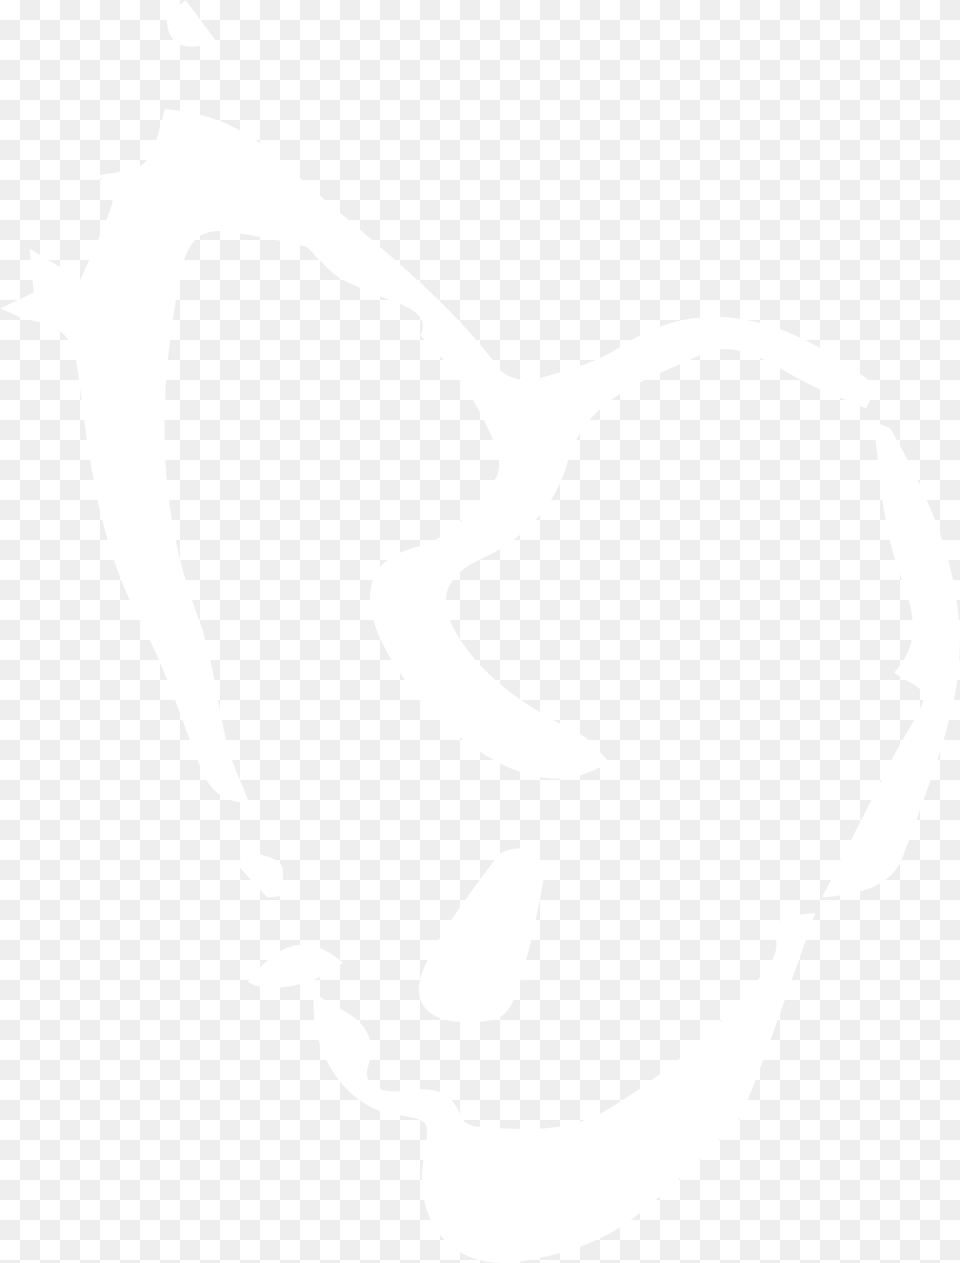 Sorry For The Confusion I Shoulda Clarified That It X Broken Heart, Cutlery Png Image